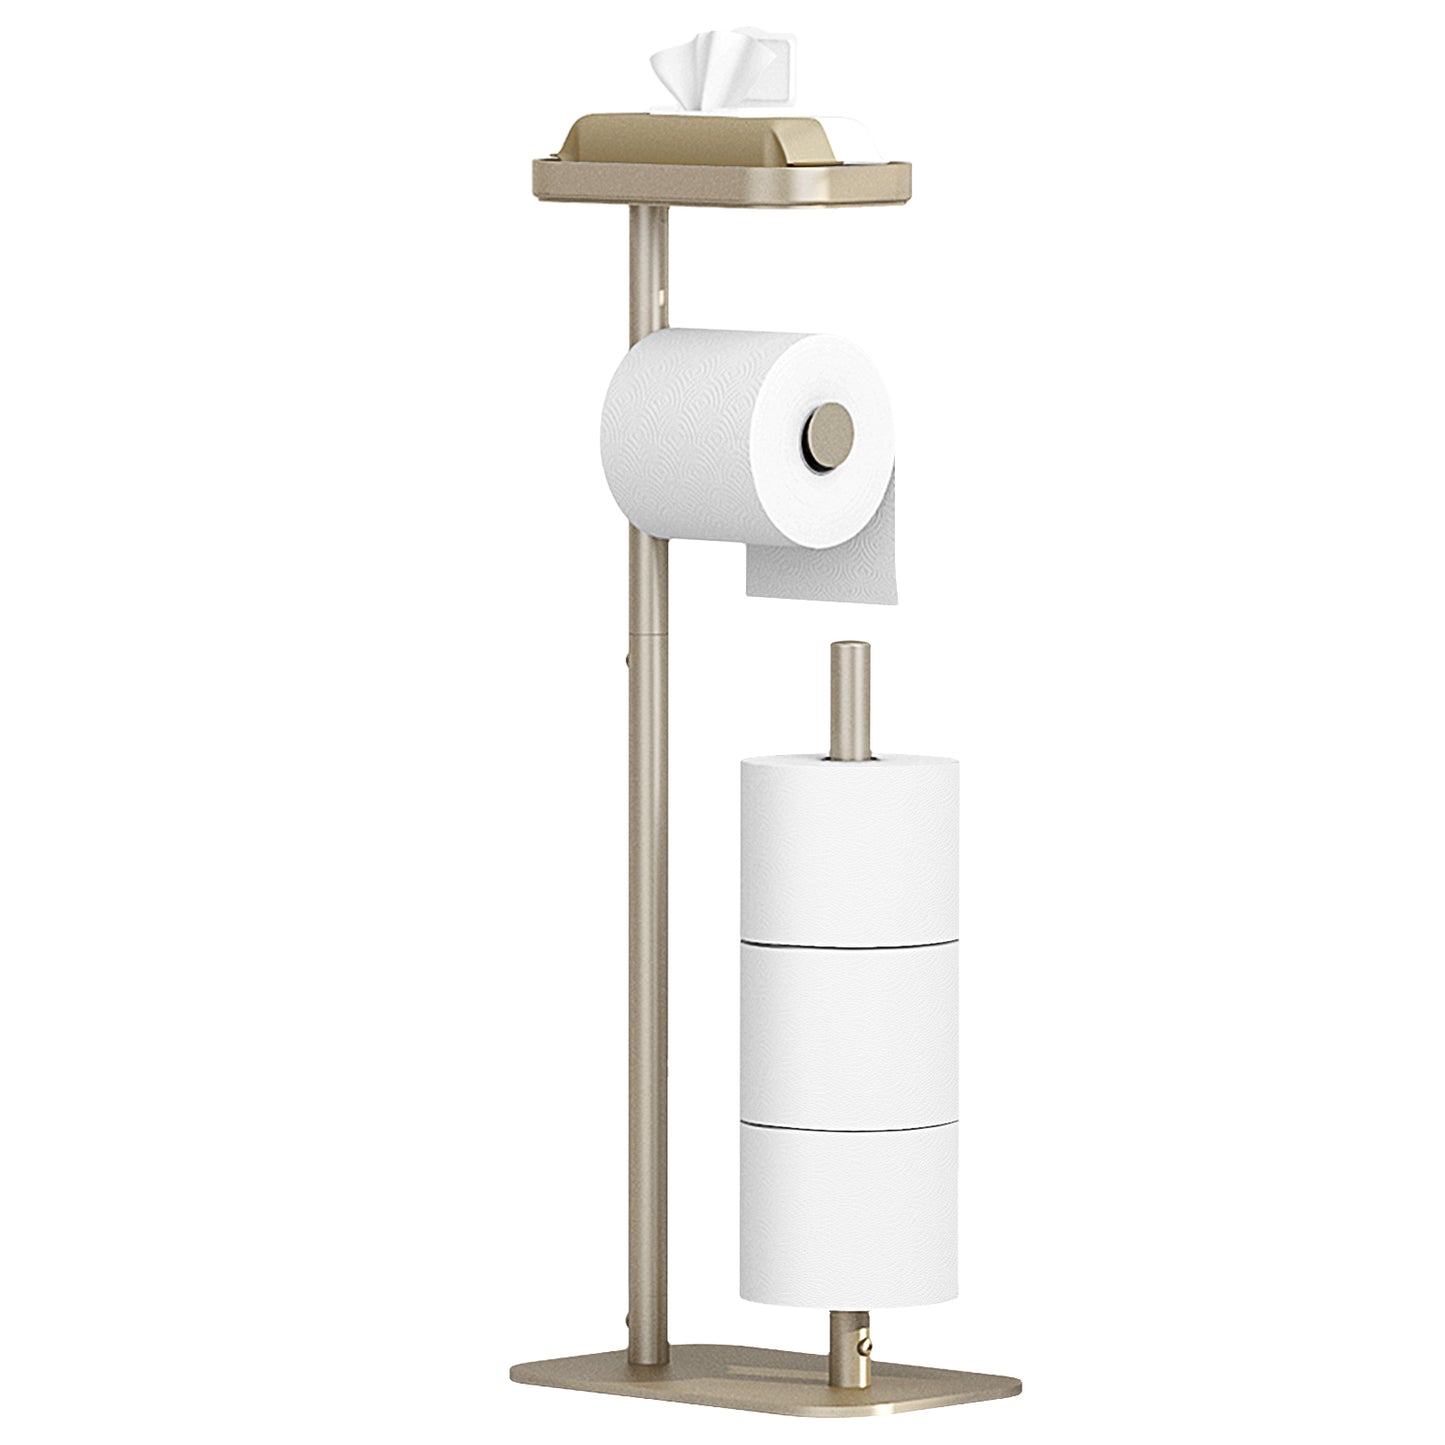 Kitsure Toilet Paper Holder Stand - Free-Standing with a Weighted Base,  Durable & Rustless Shelf and Storage Design (439)